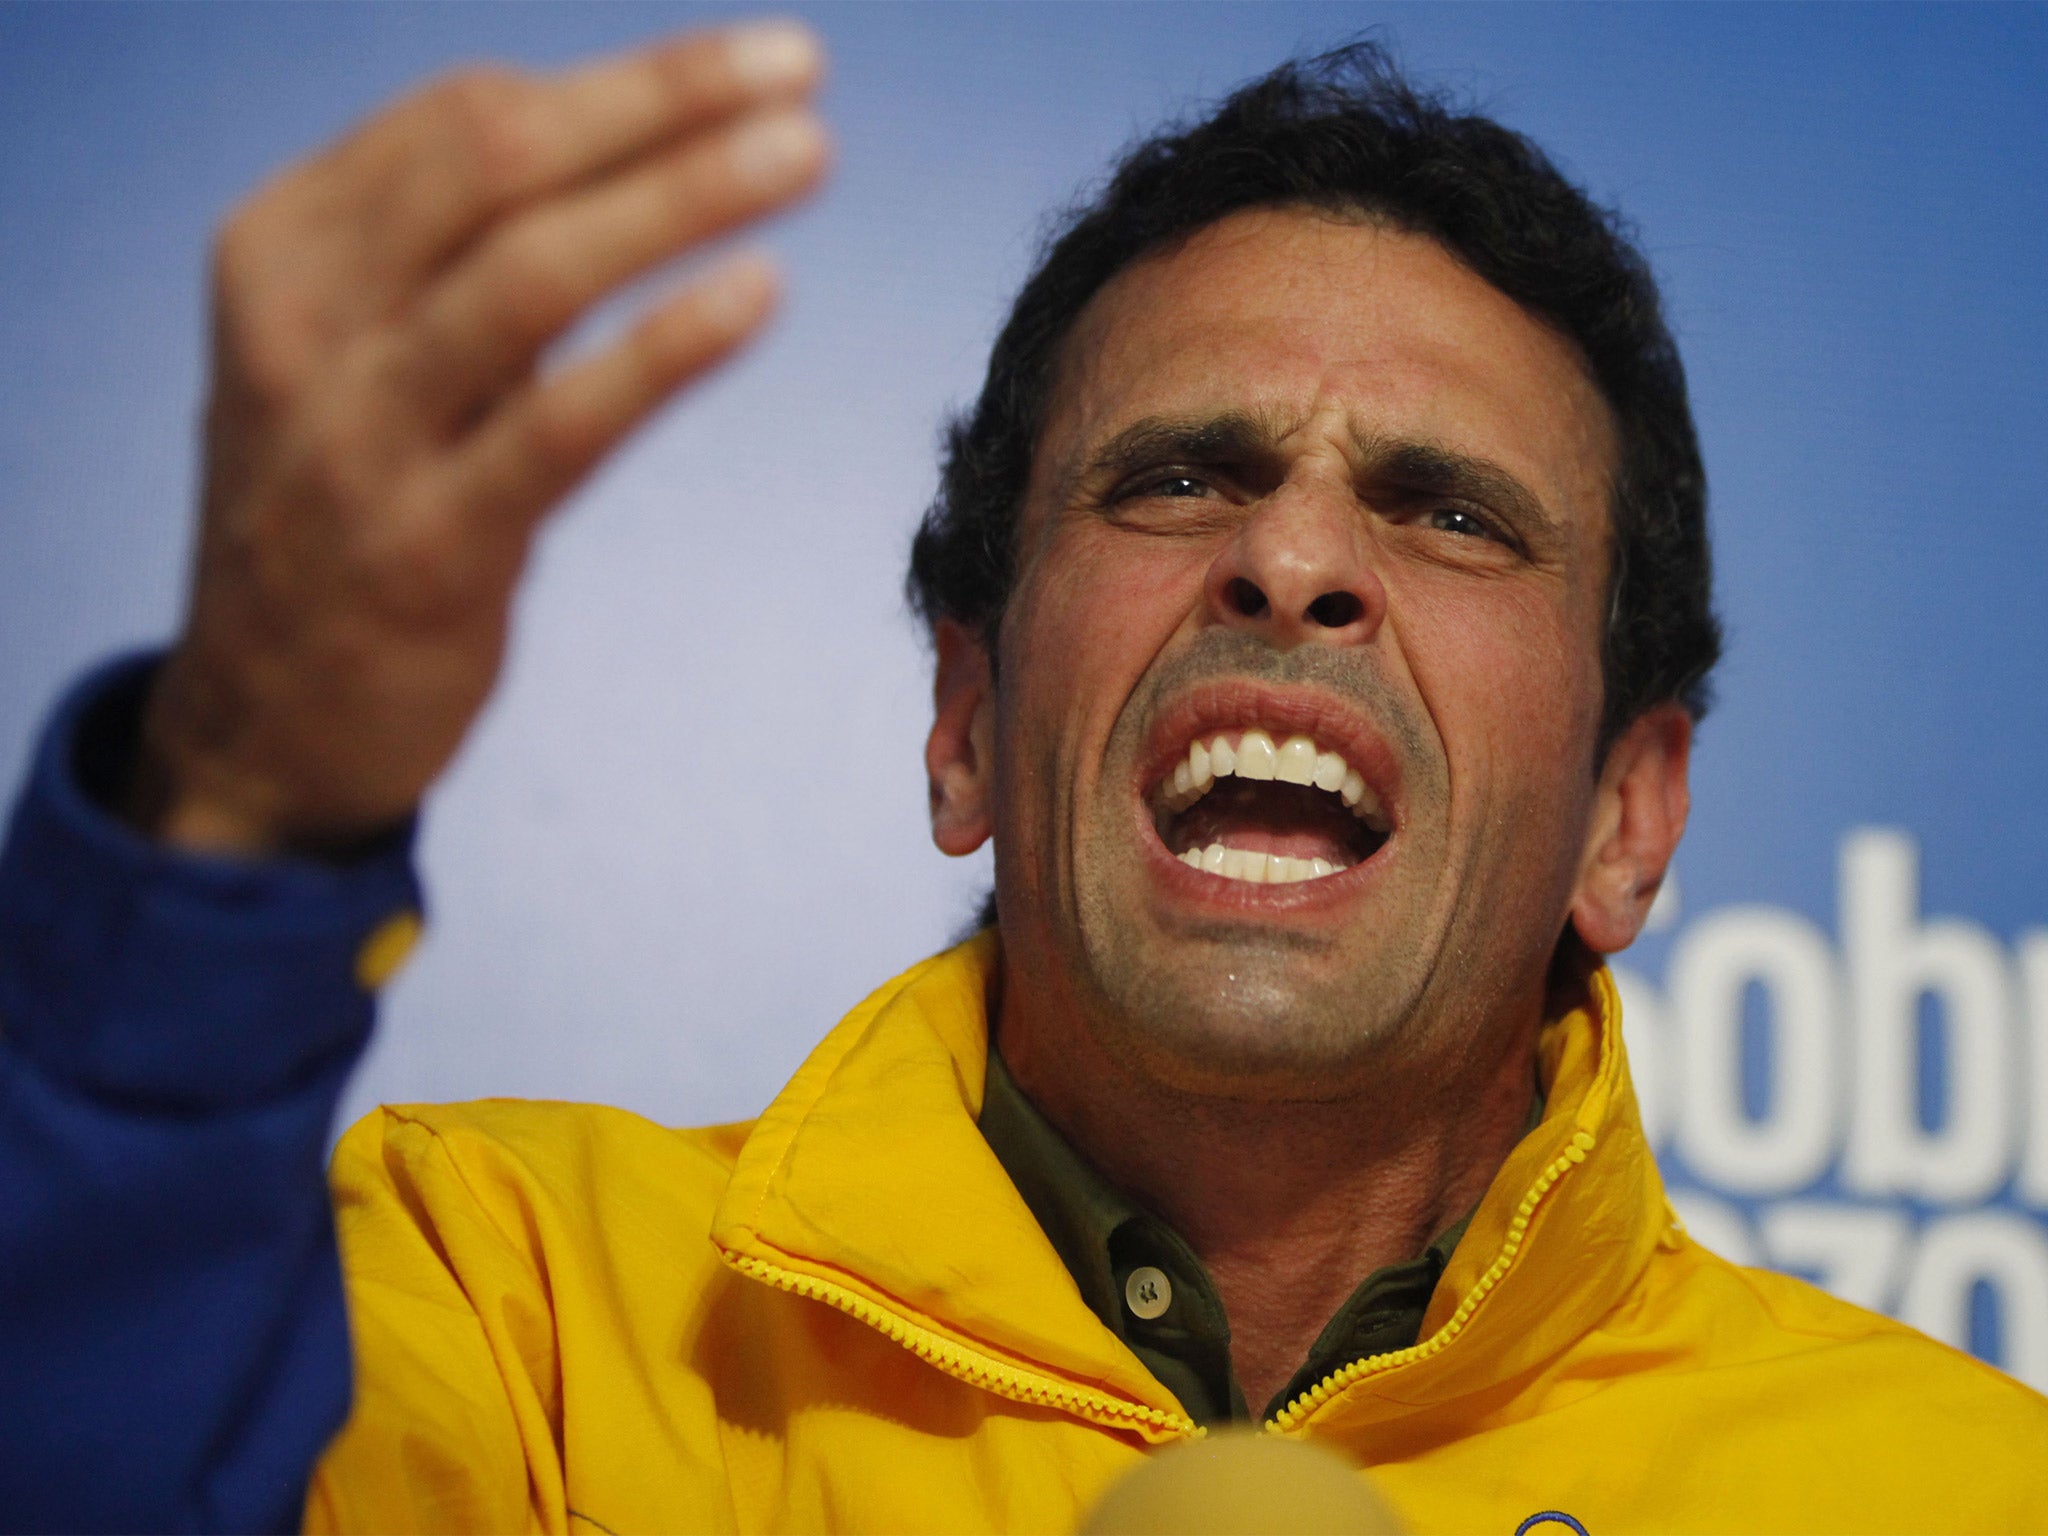 Henrique Capriles hopes to unseat President Maduro through elections